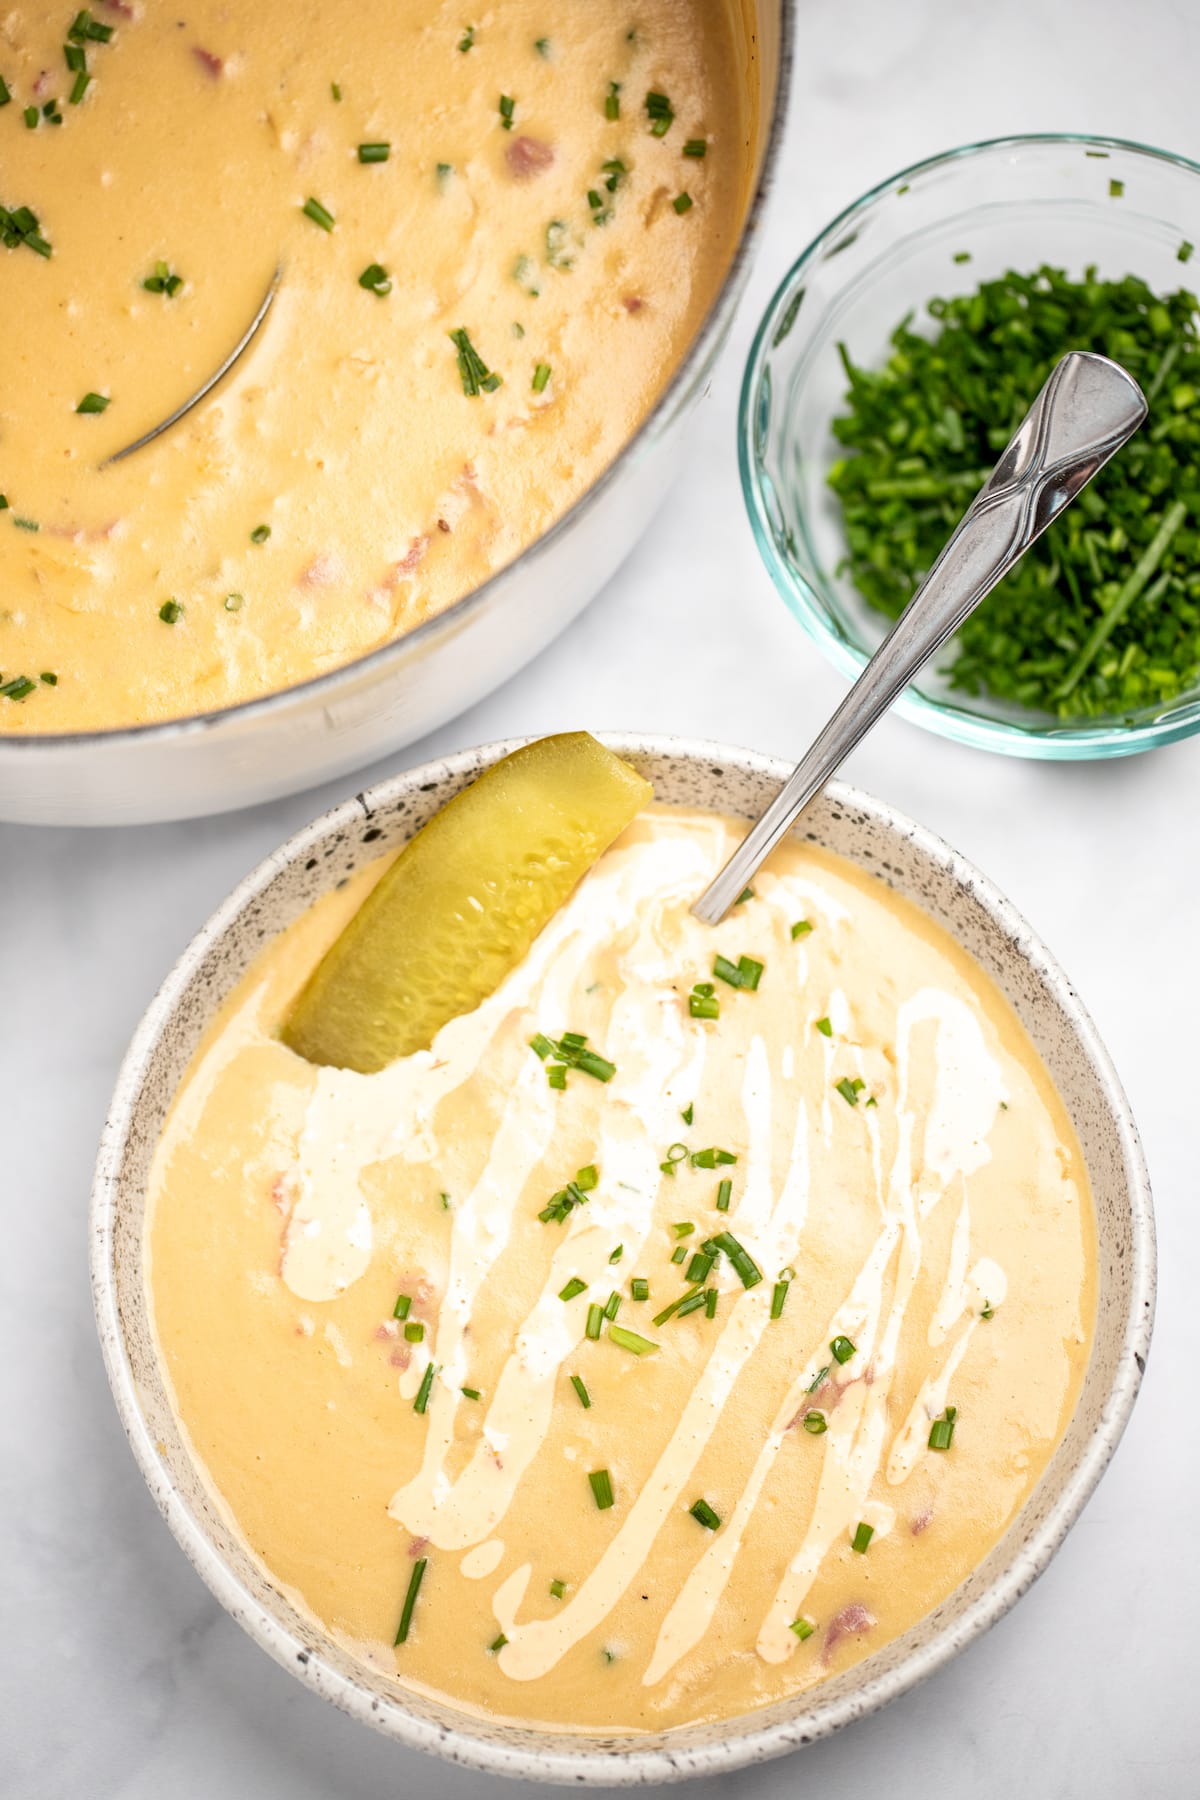 A spoon in a bowl of reuben soup on a table, topped with a pickle and a drizzle of Thousand Island dressing and chopped chives, in front of a dutch oven of soup and a small bowl of chives.